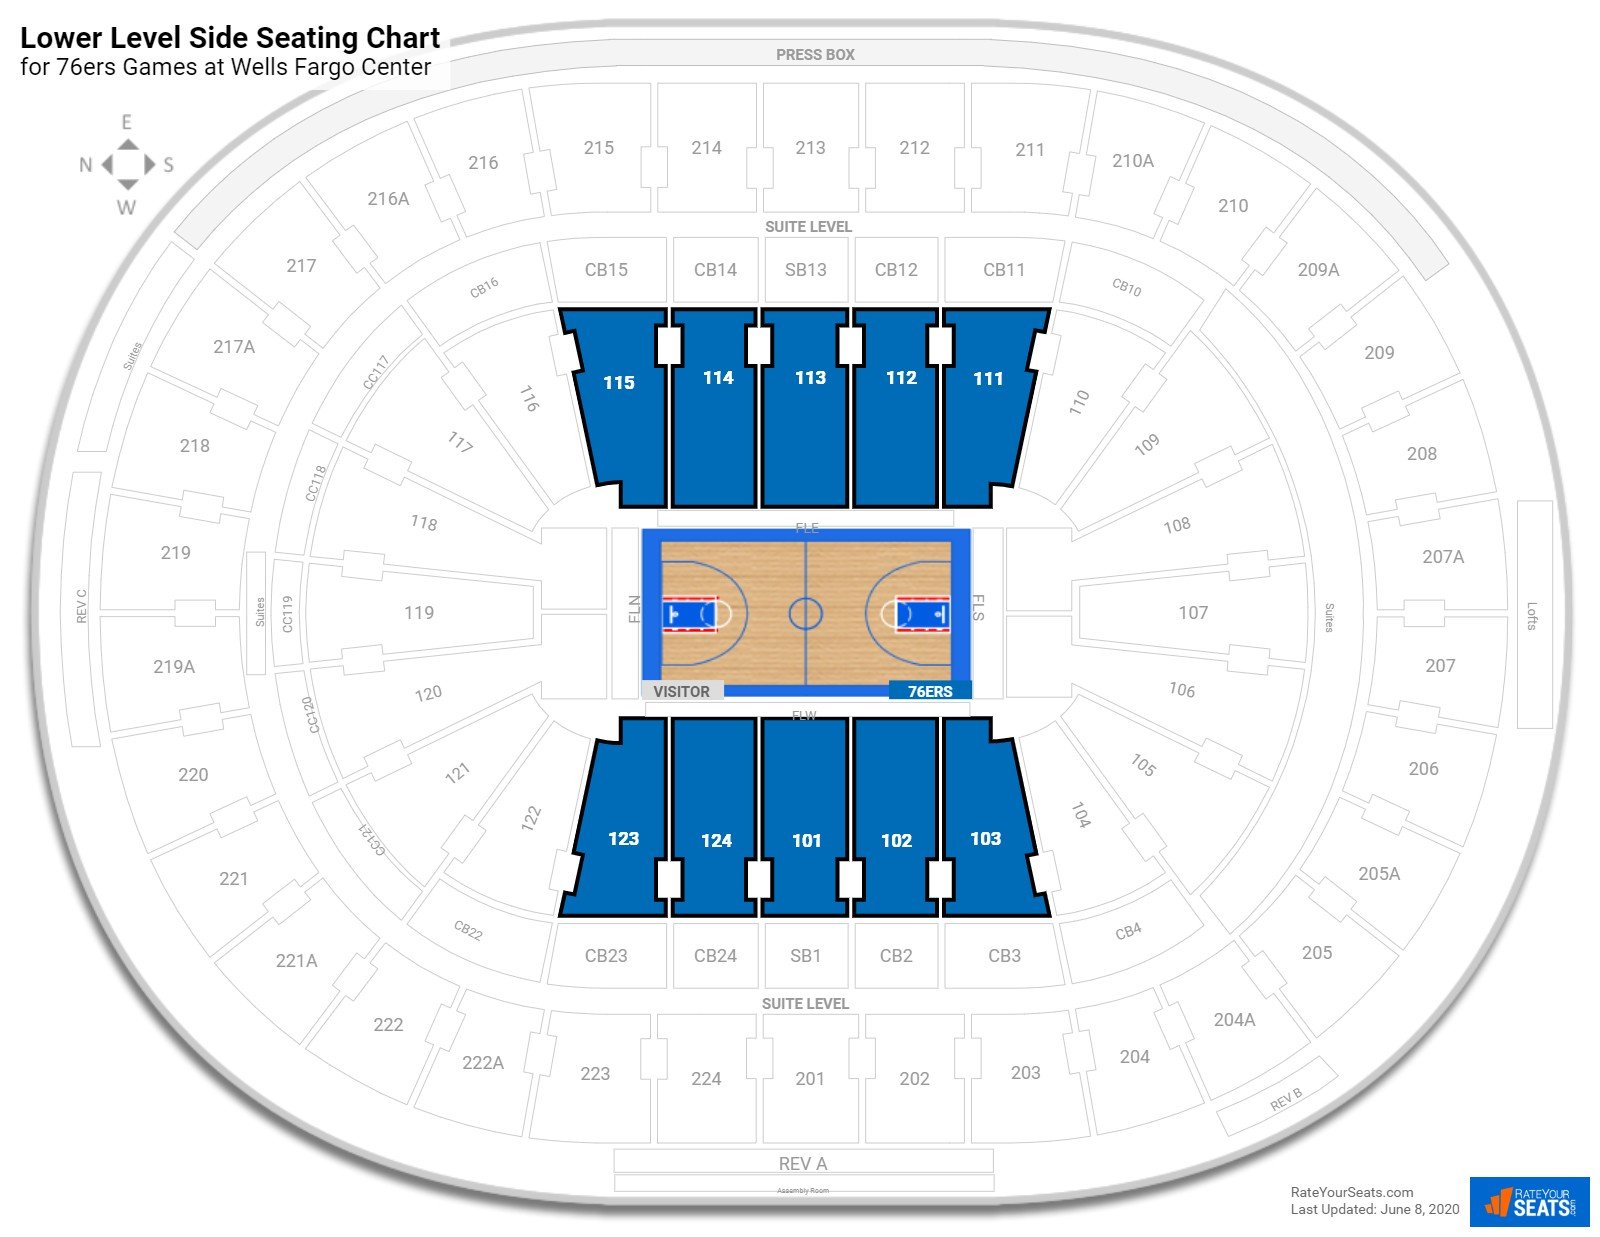 Lower Level Side - Wells Fargo Center Basketball Seating - RateYourSeats.com